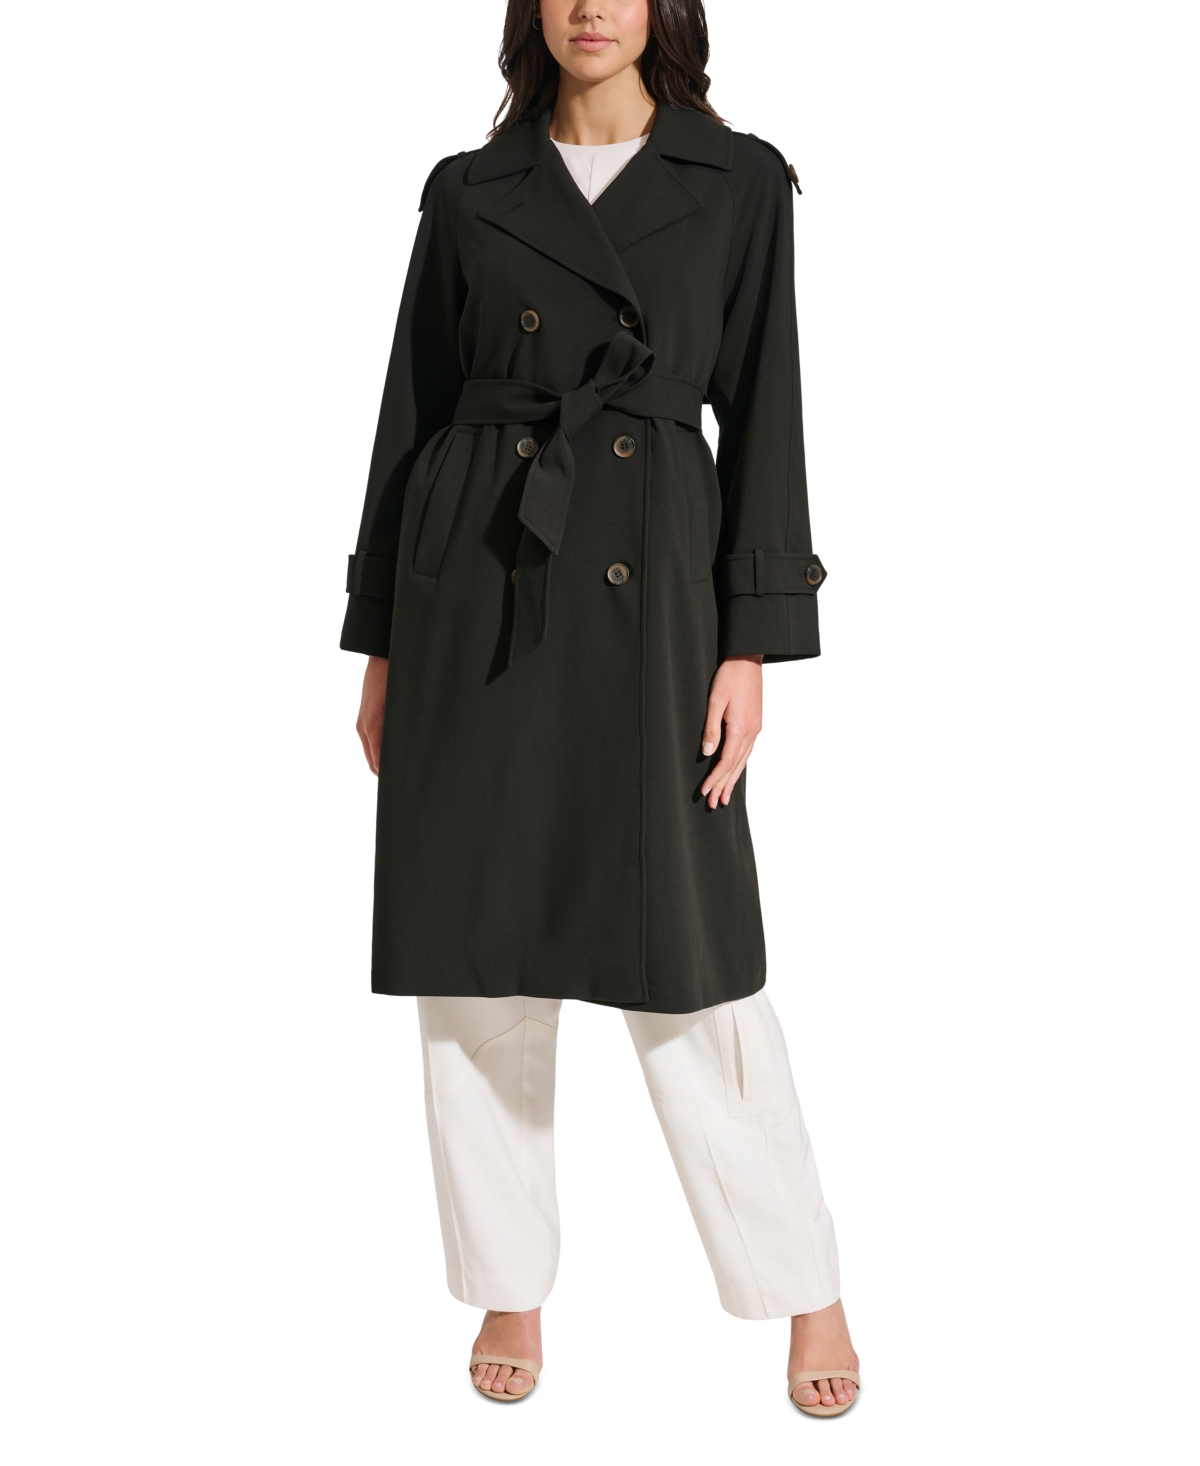 Women's Double-Breasted Trench Coat - Black